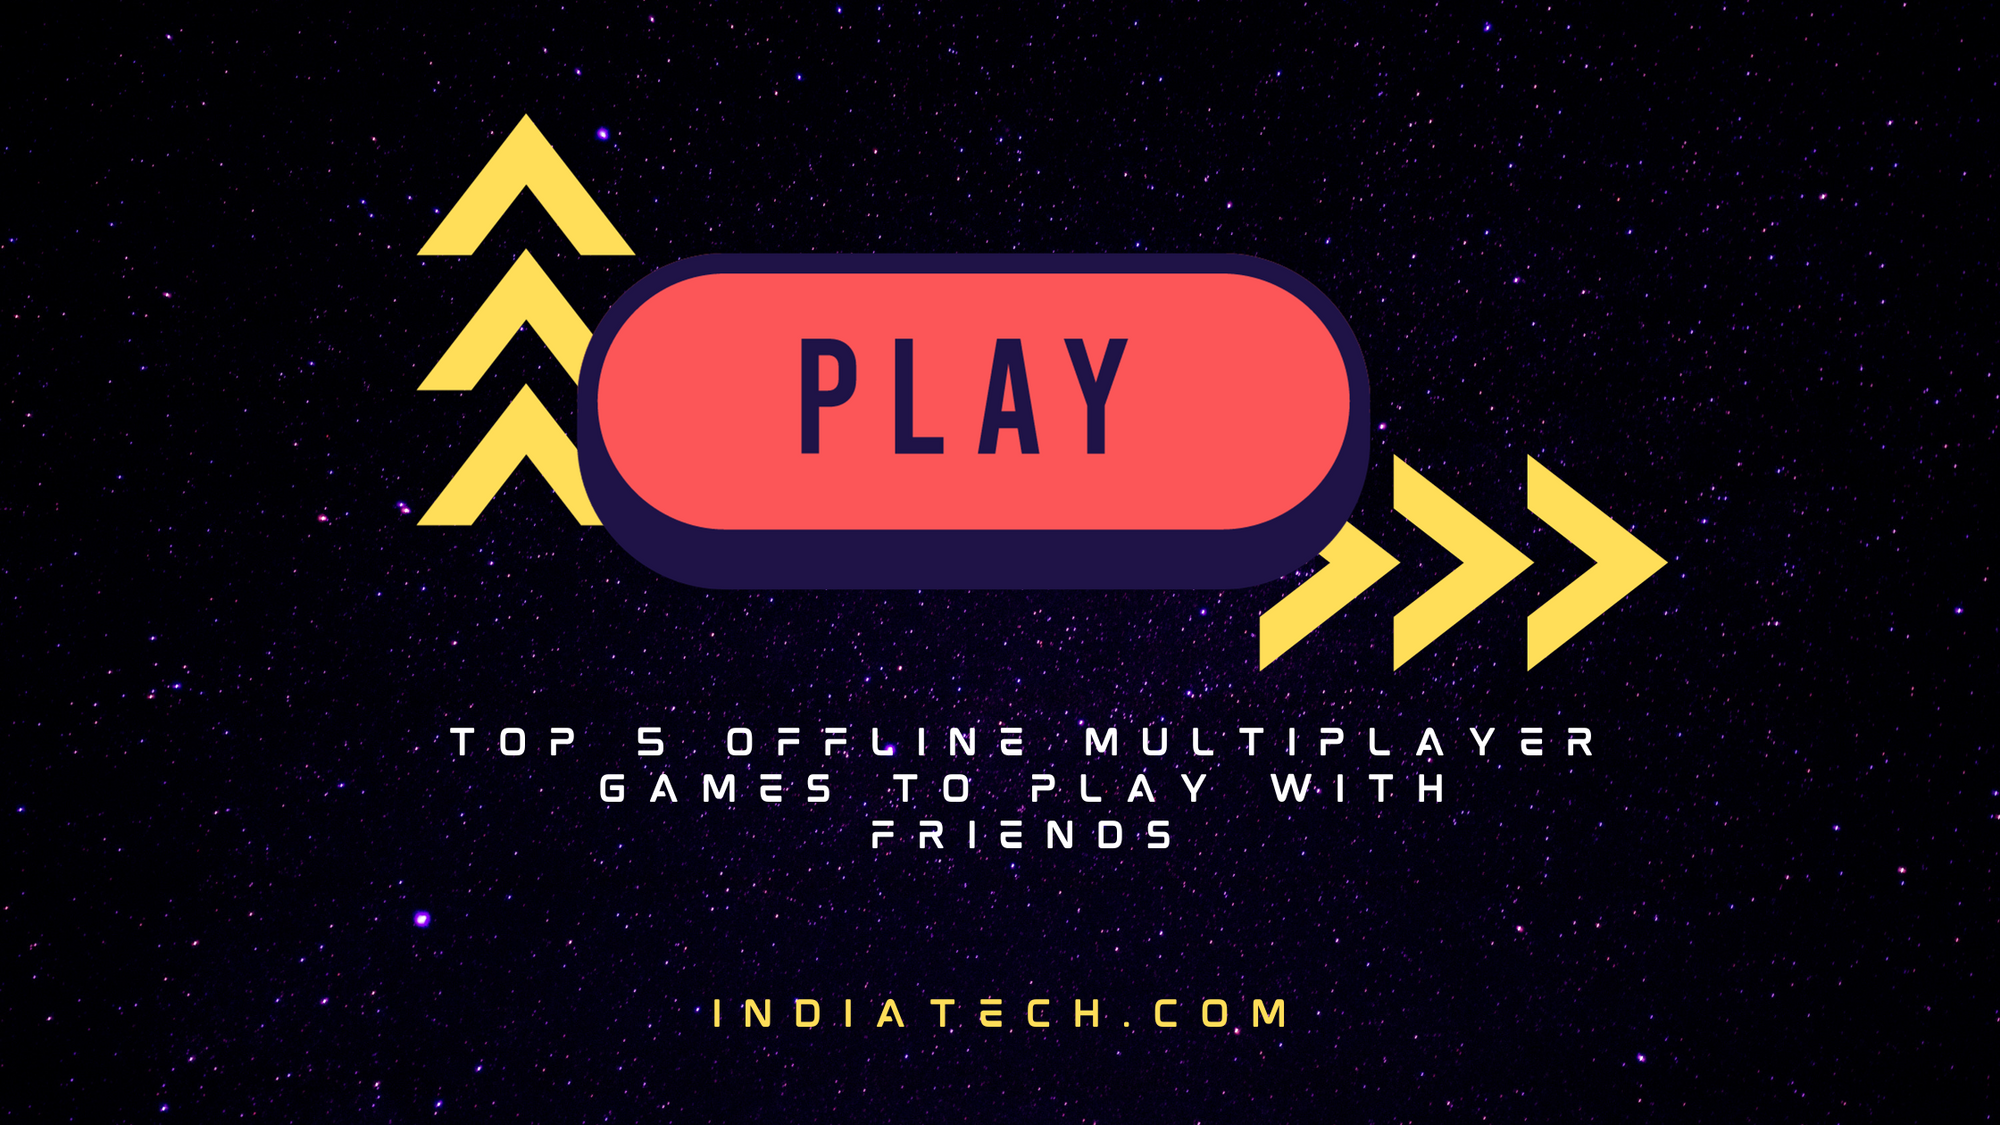 Top 10 Offline Multiplayer Games With LAN Options to Play With Friends